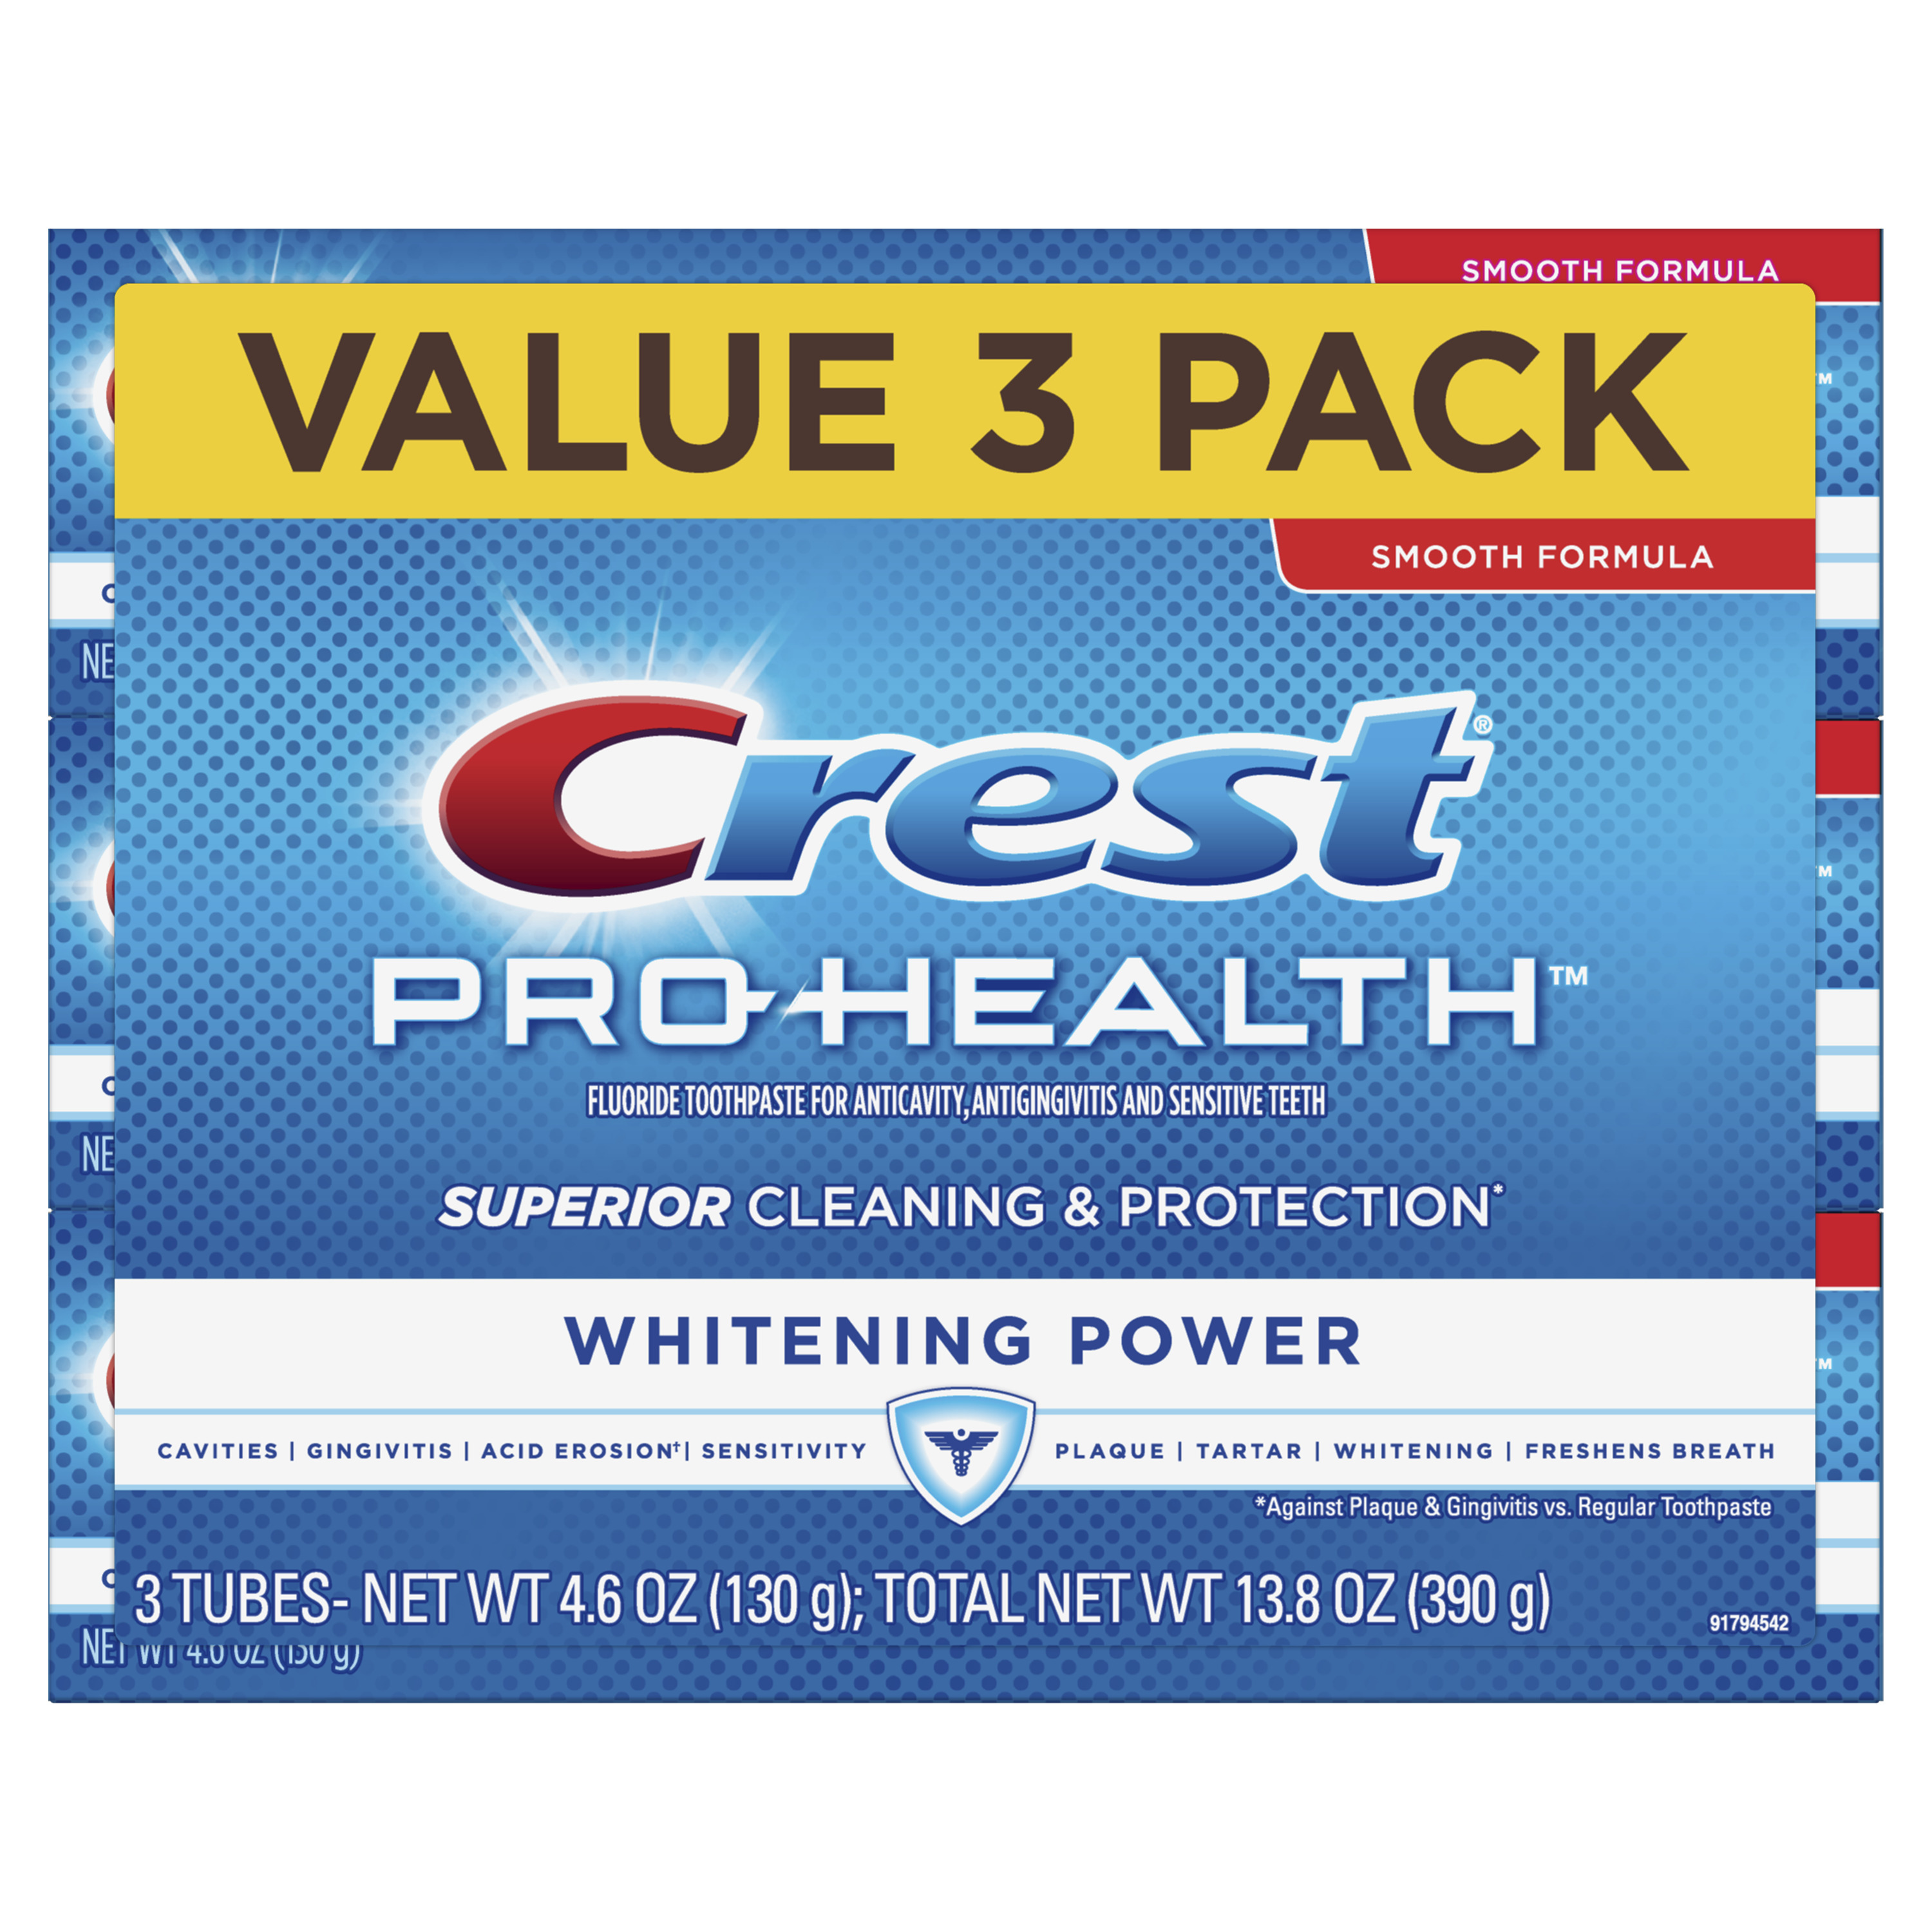 Crest Pro-Health Whitening Power Toothpaste, 4.6 oz, Pack of 3 - image 1 of 7